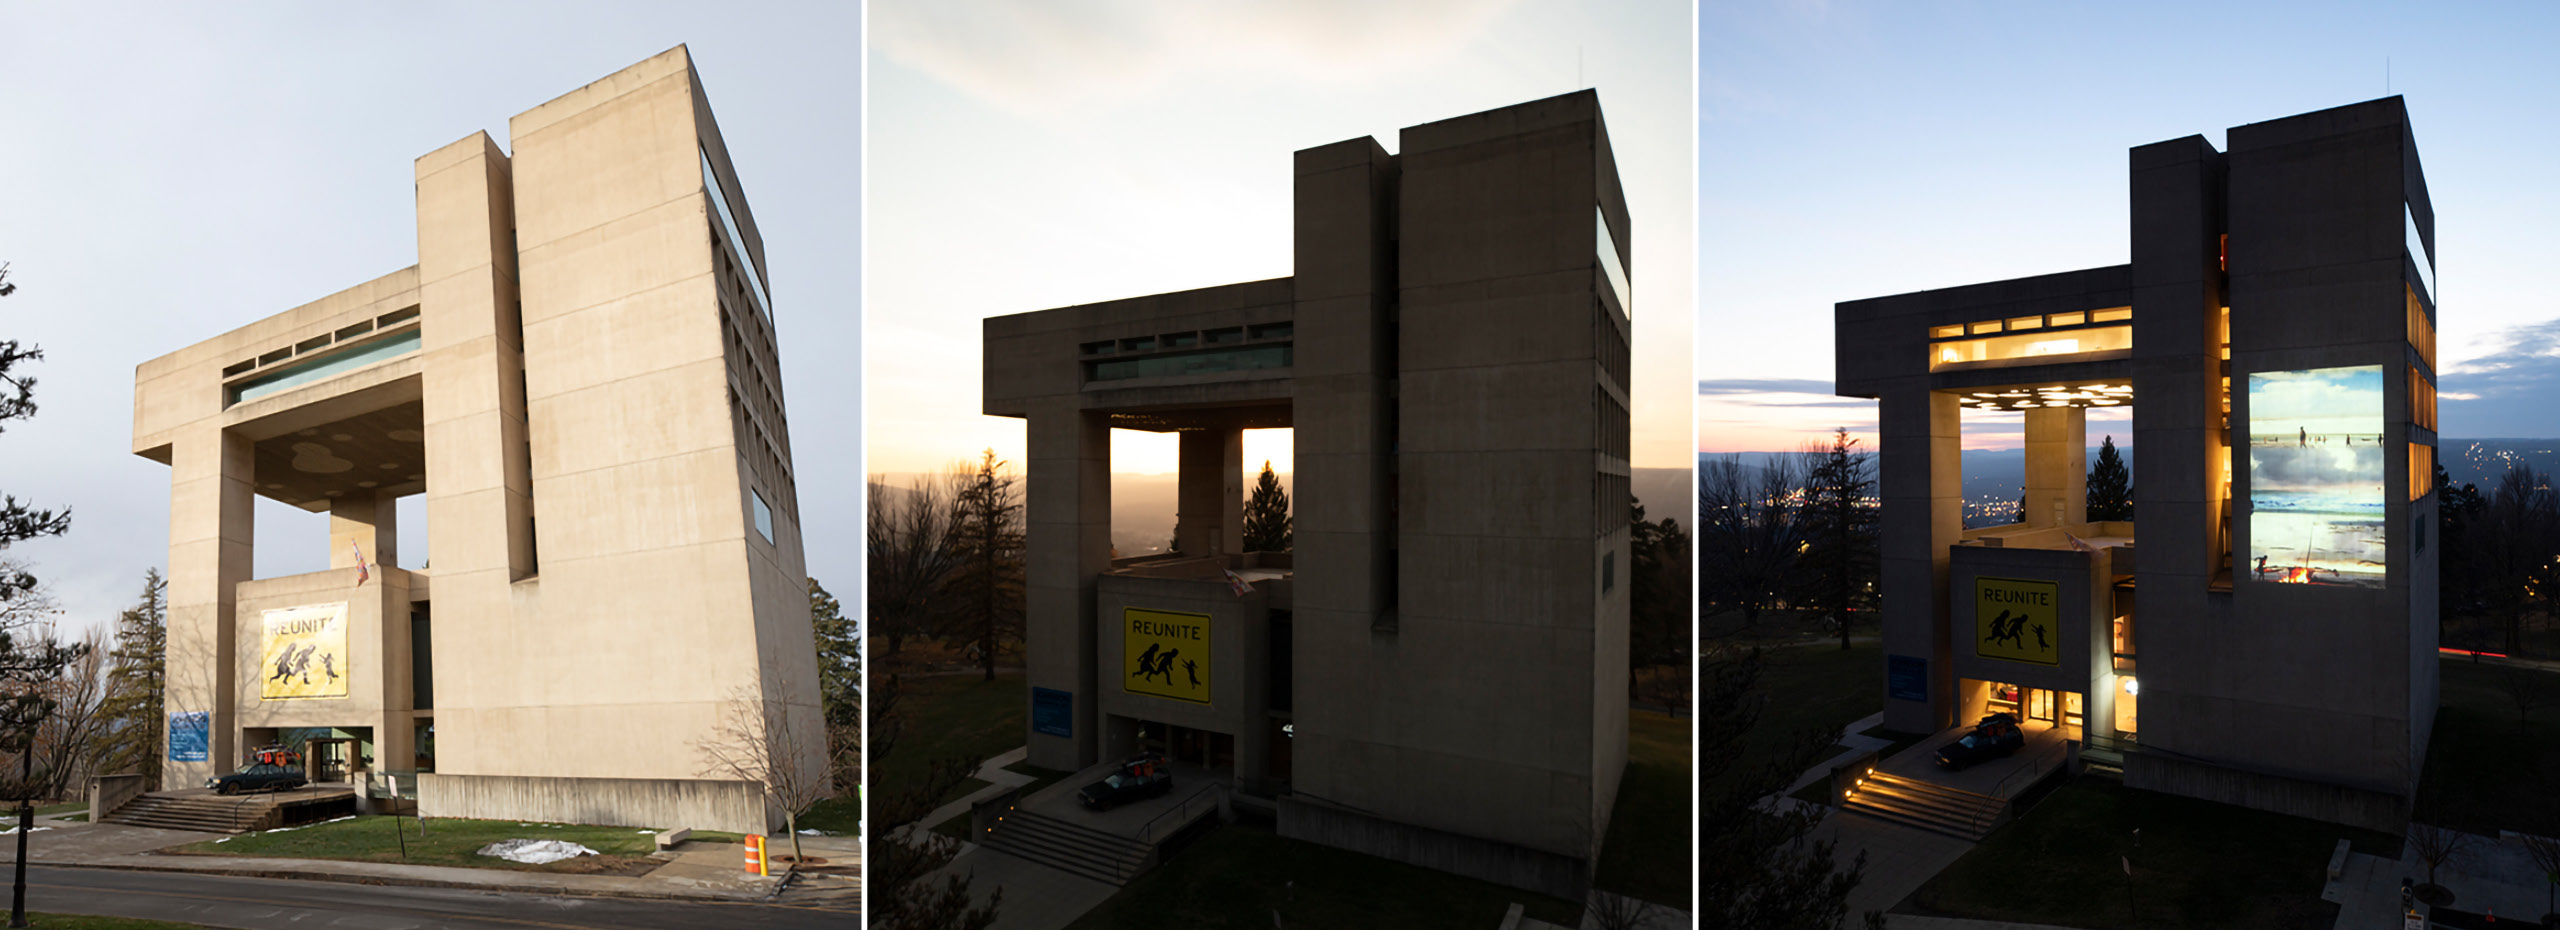 Three images of the Johnson Museum show outdoor installations in the morning, twilight, and sunset